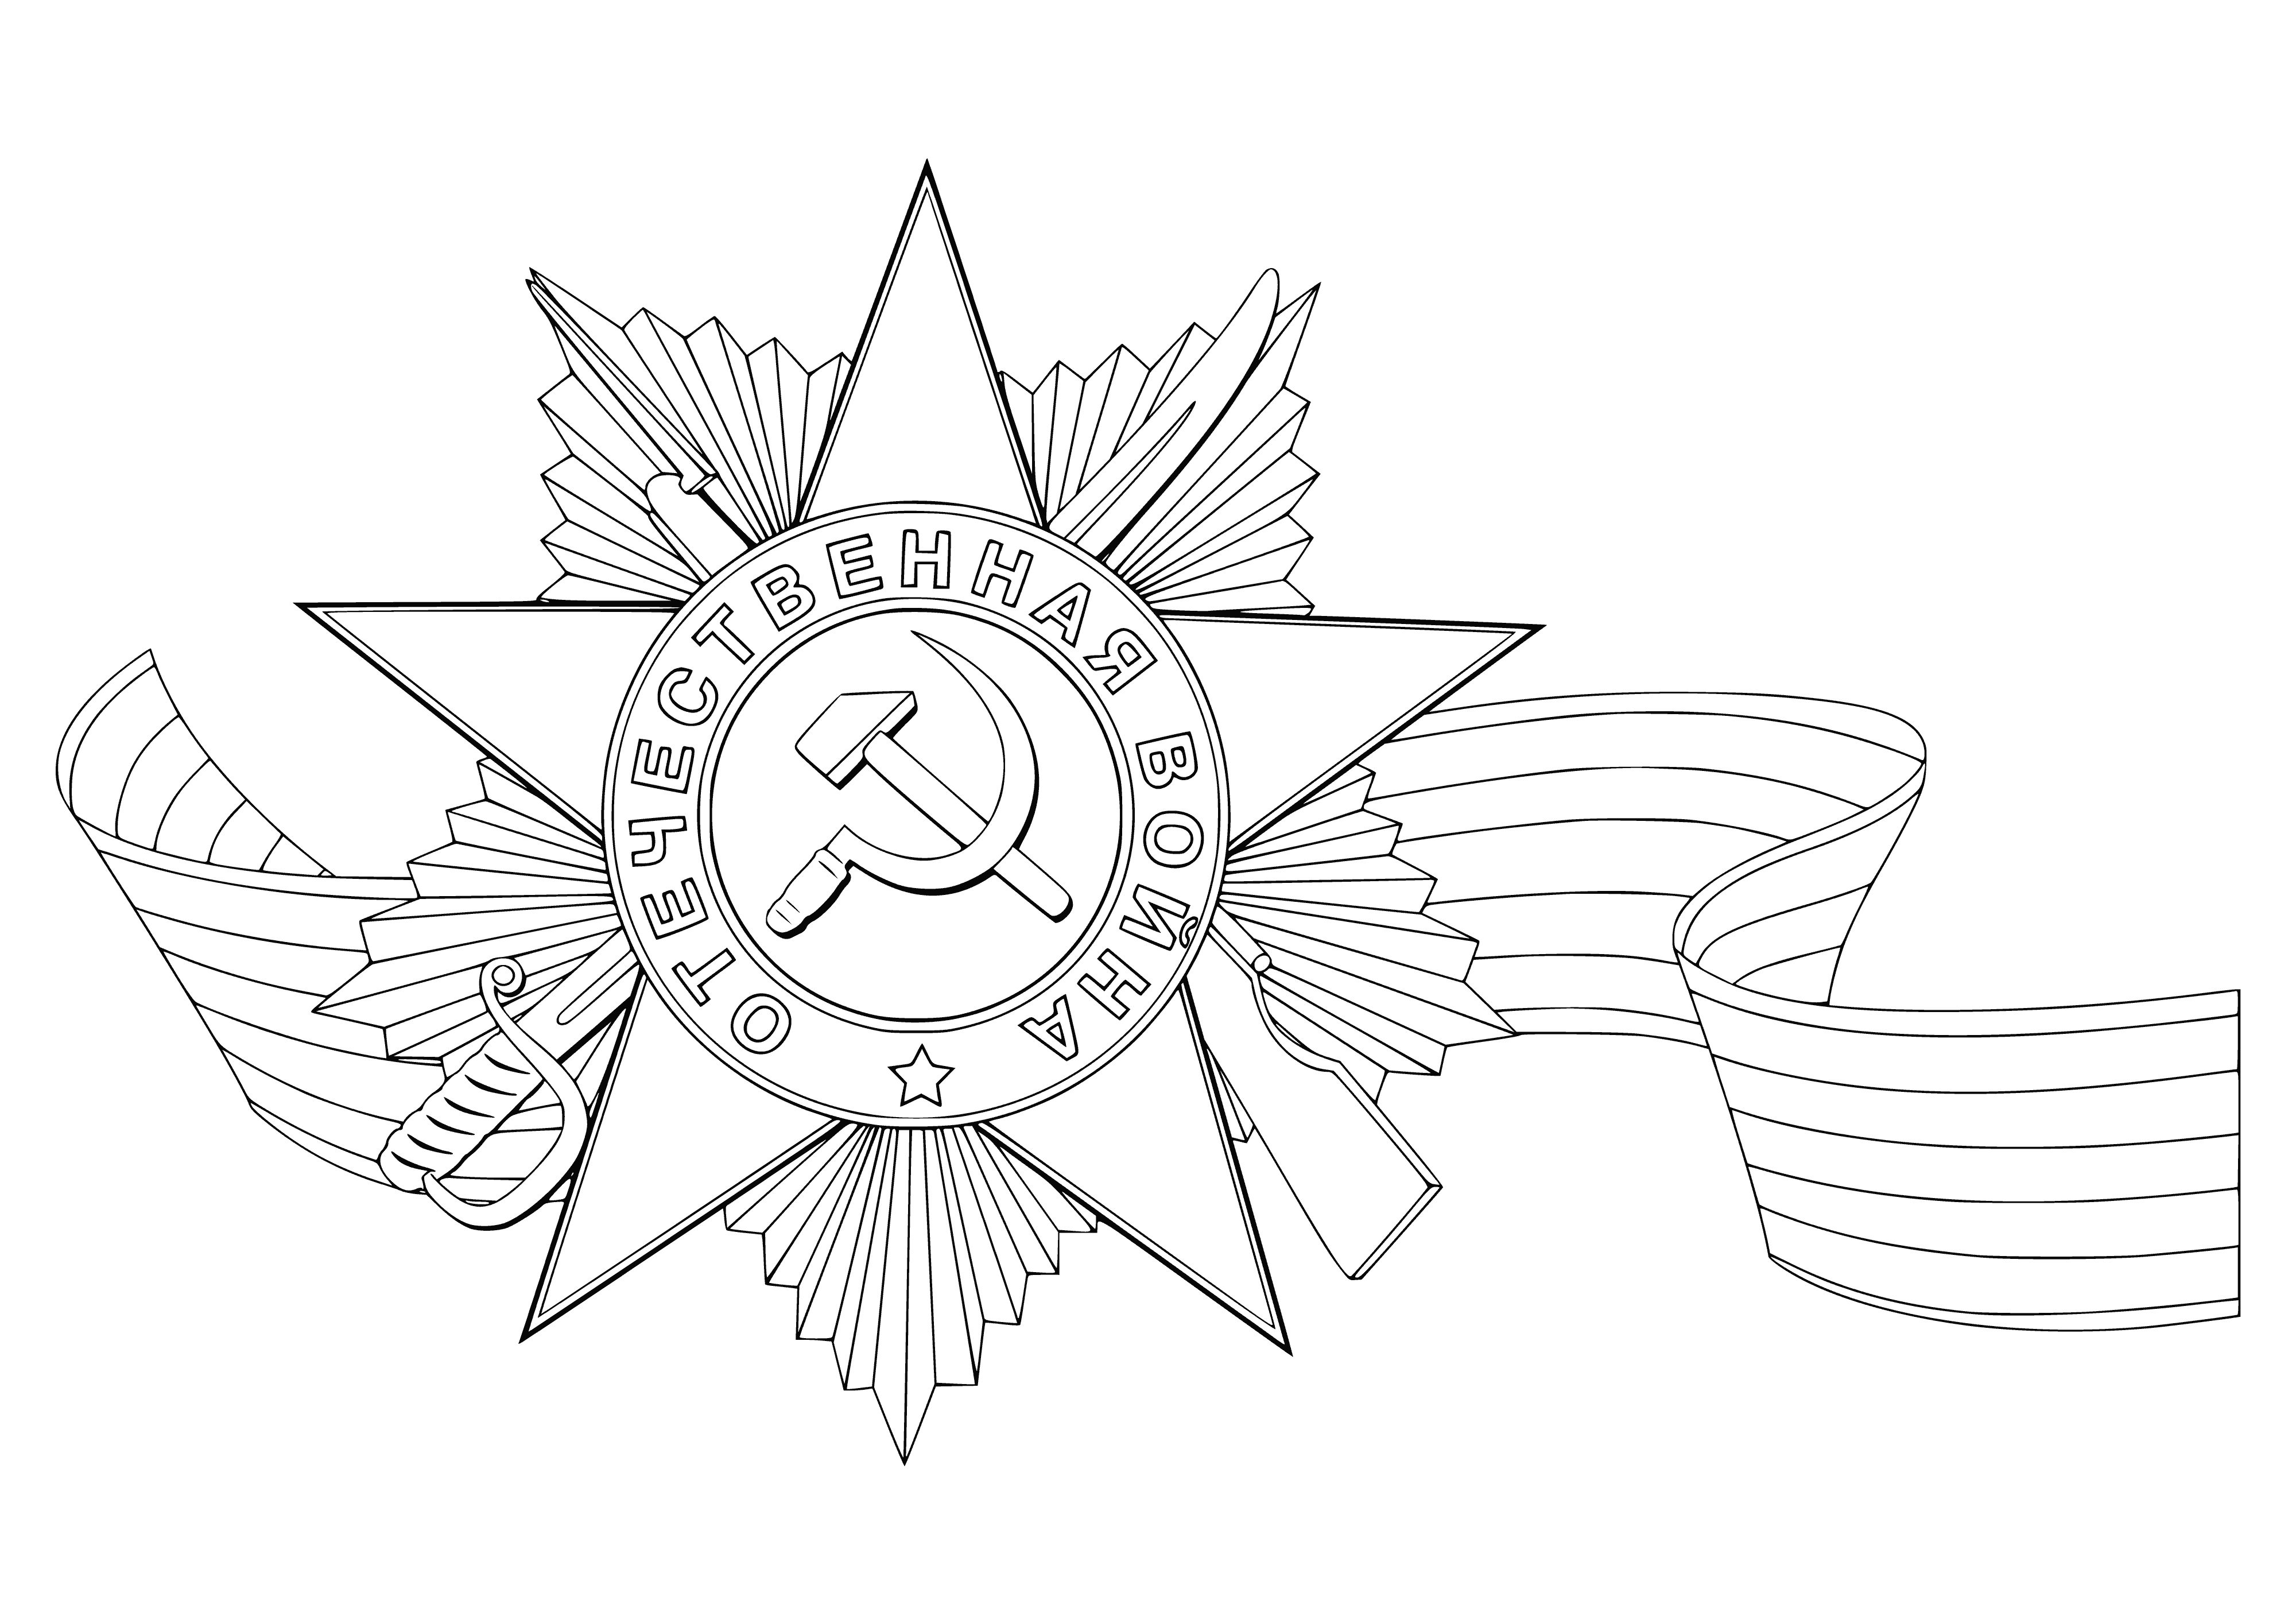 Order of the Patriotic War coloring page